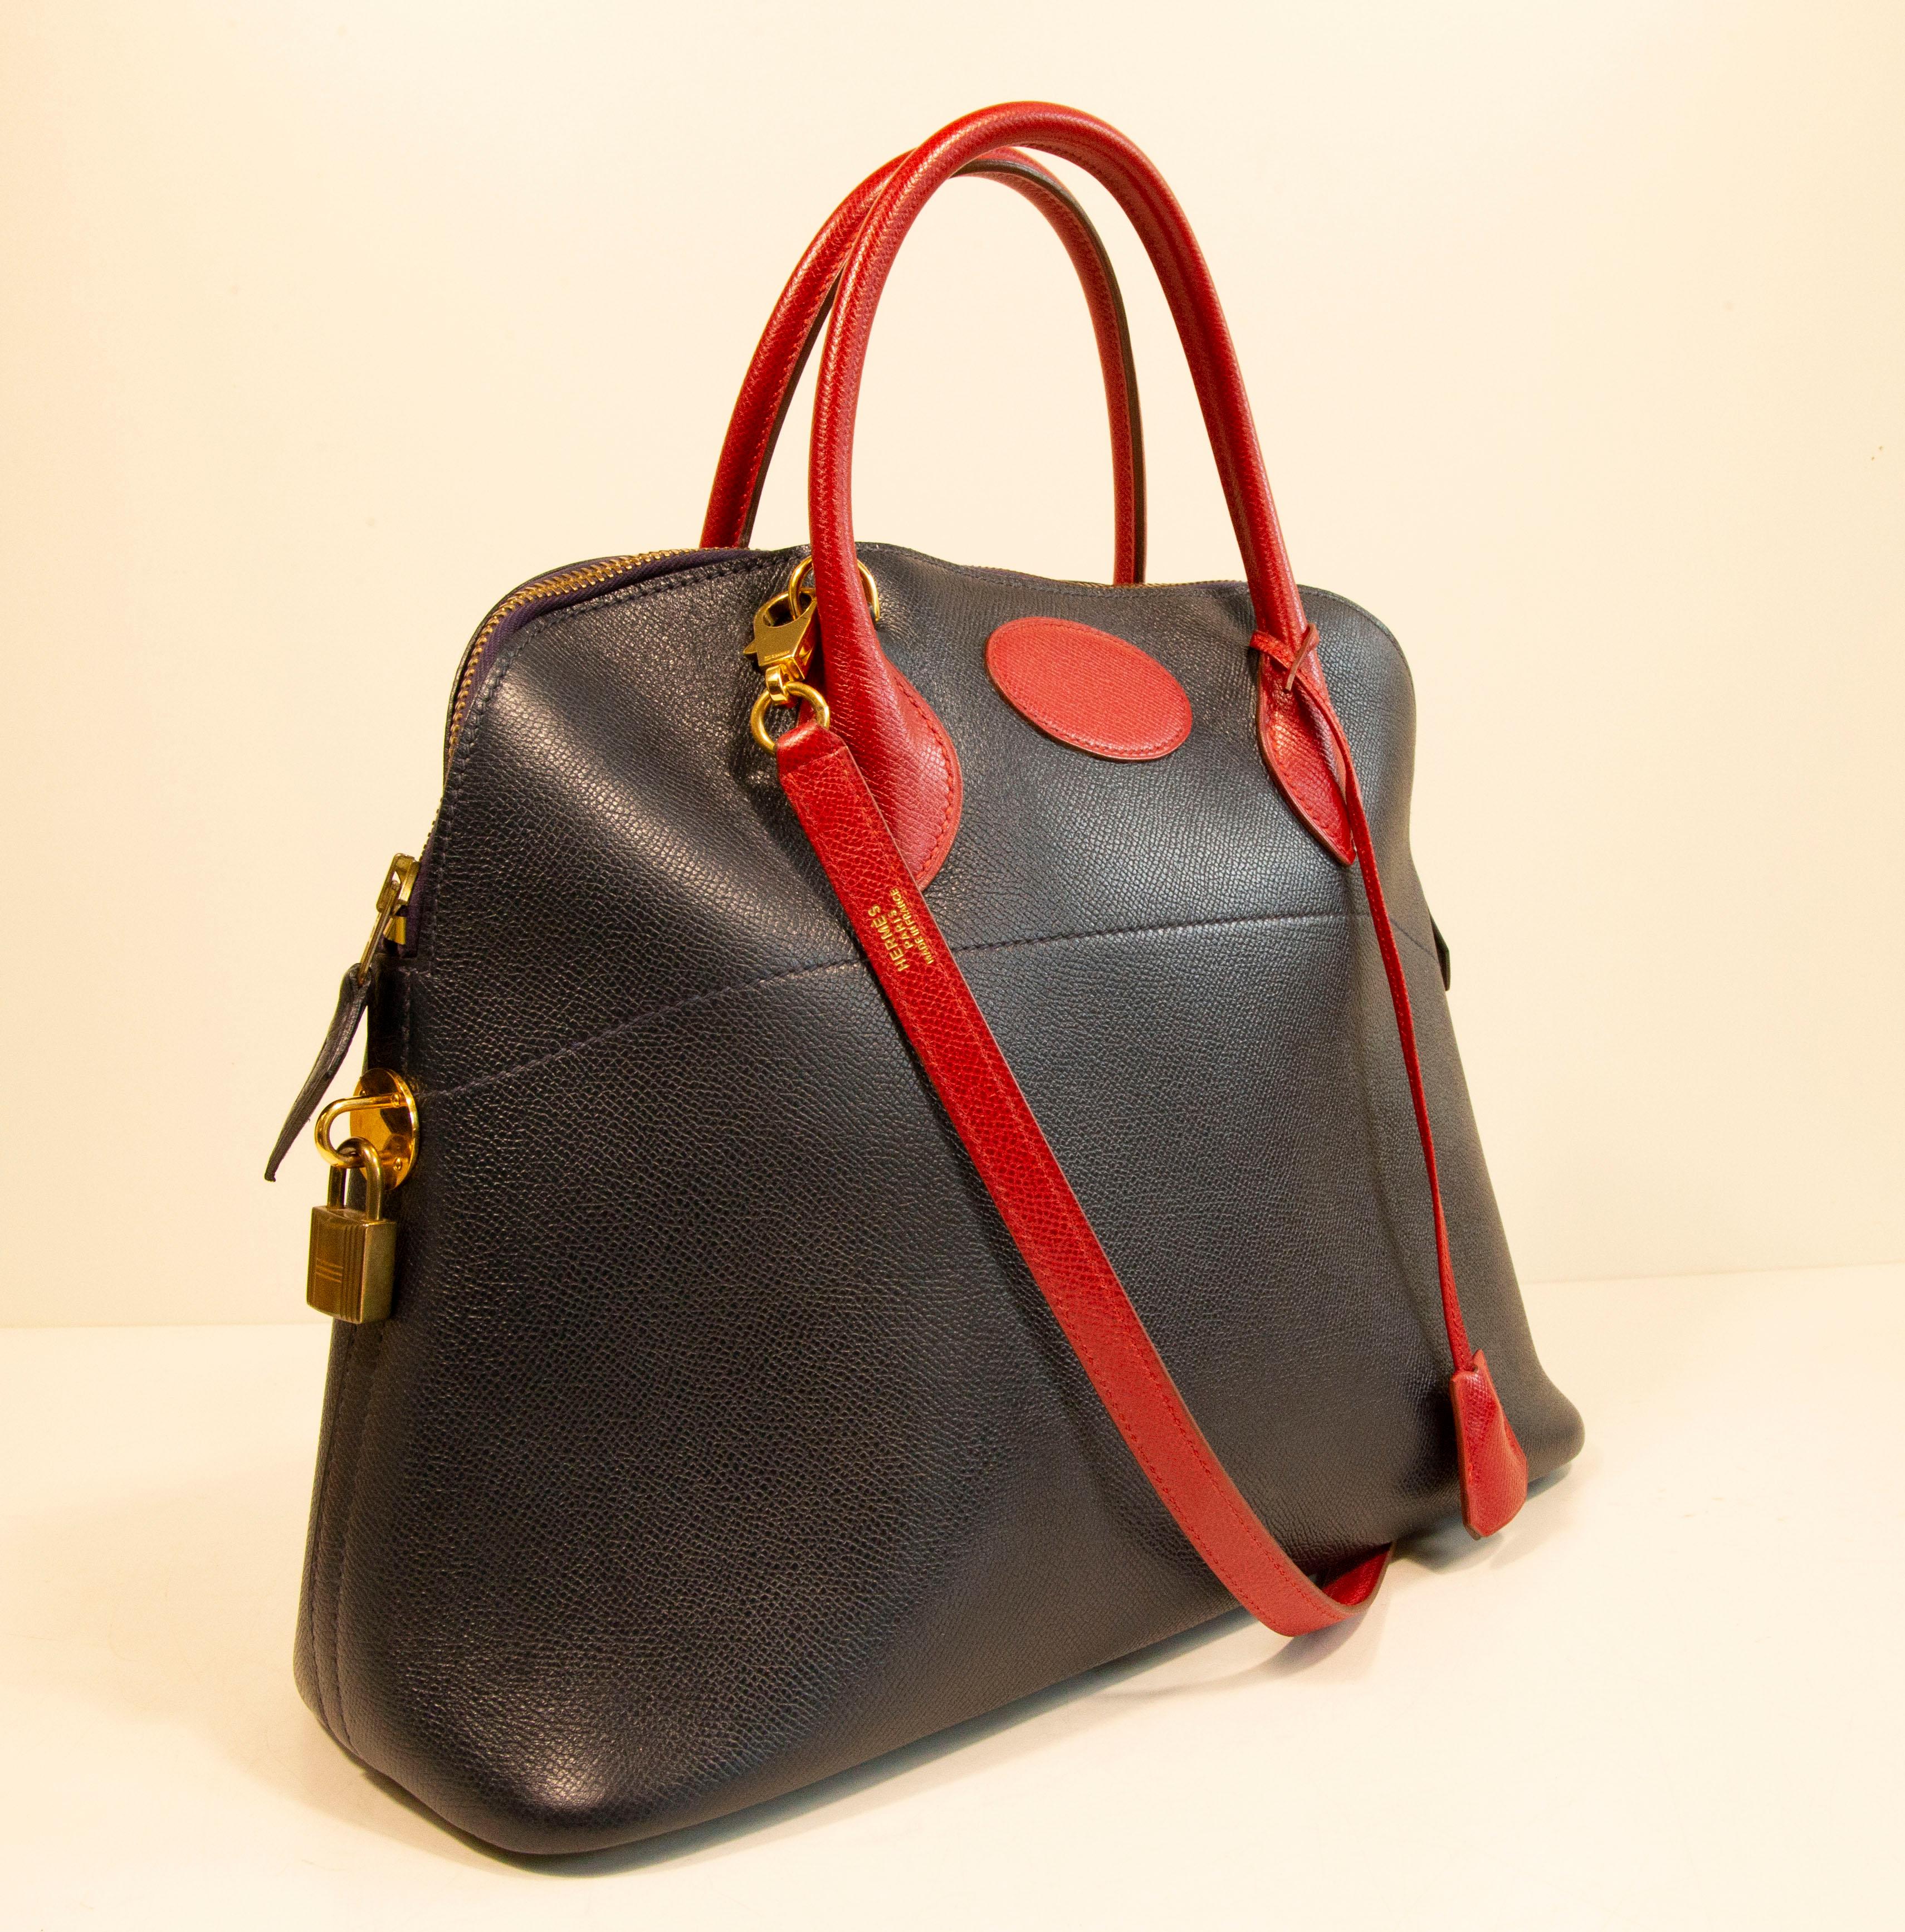 1990s Hermes Bolide 35 Bag in Navy Blue and Red Leather In Good Condition For Sale In Arnhem, NL